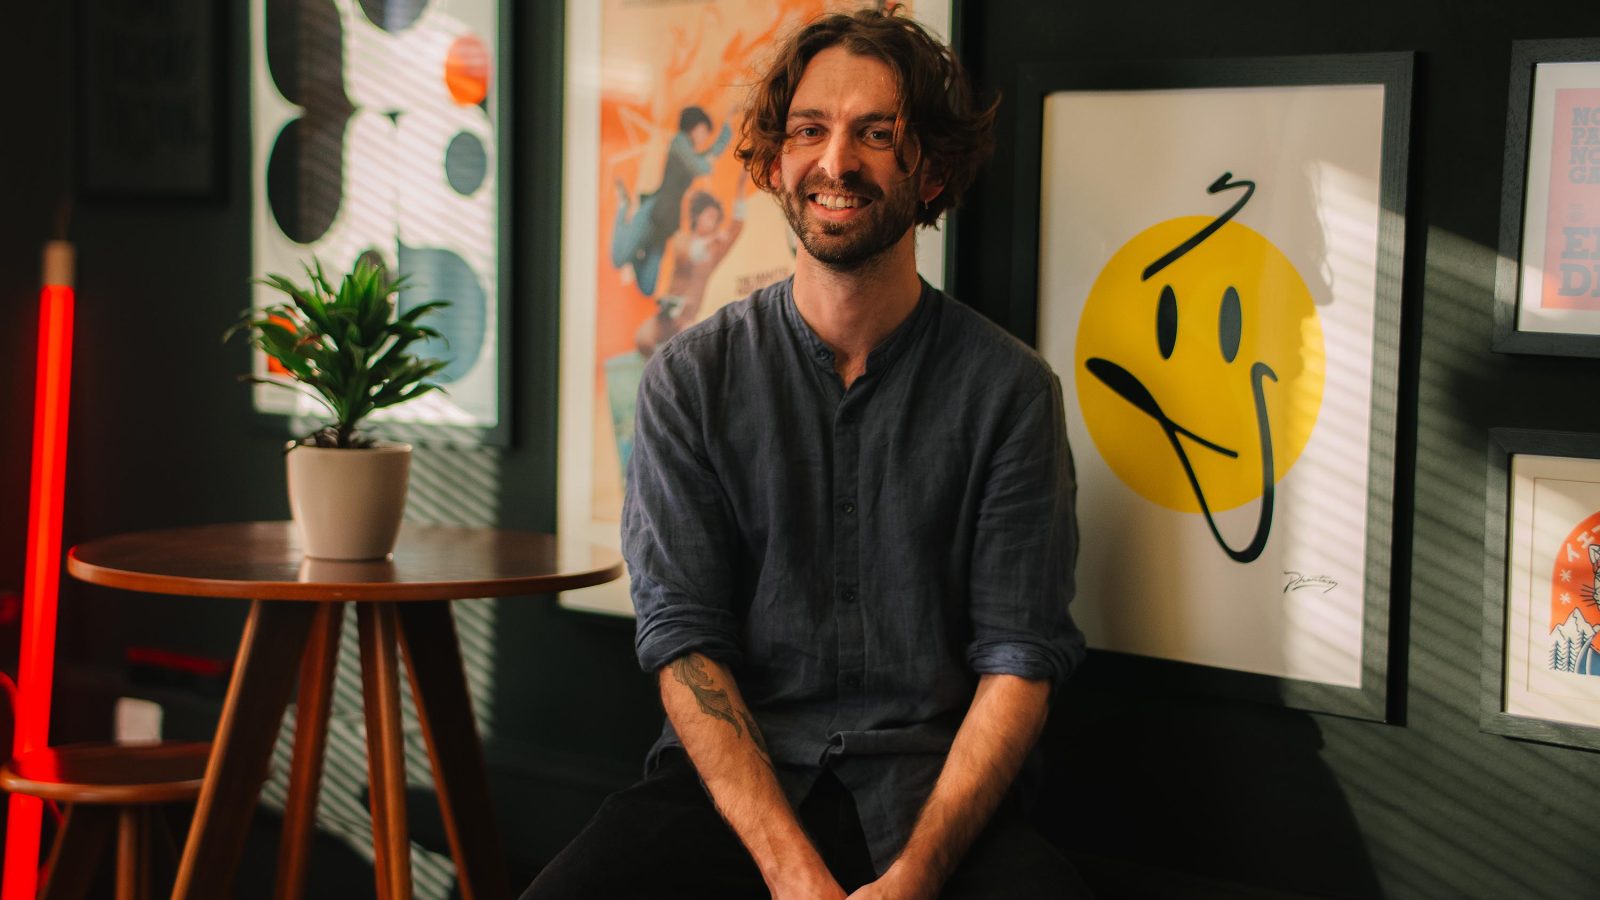 A smiling man with curly hair, dressed in a blue shirt, sits in front of brightly-colored graphic posters and a potted plant in a stylish room at a design agency in the UK.